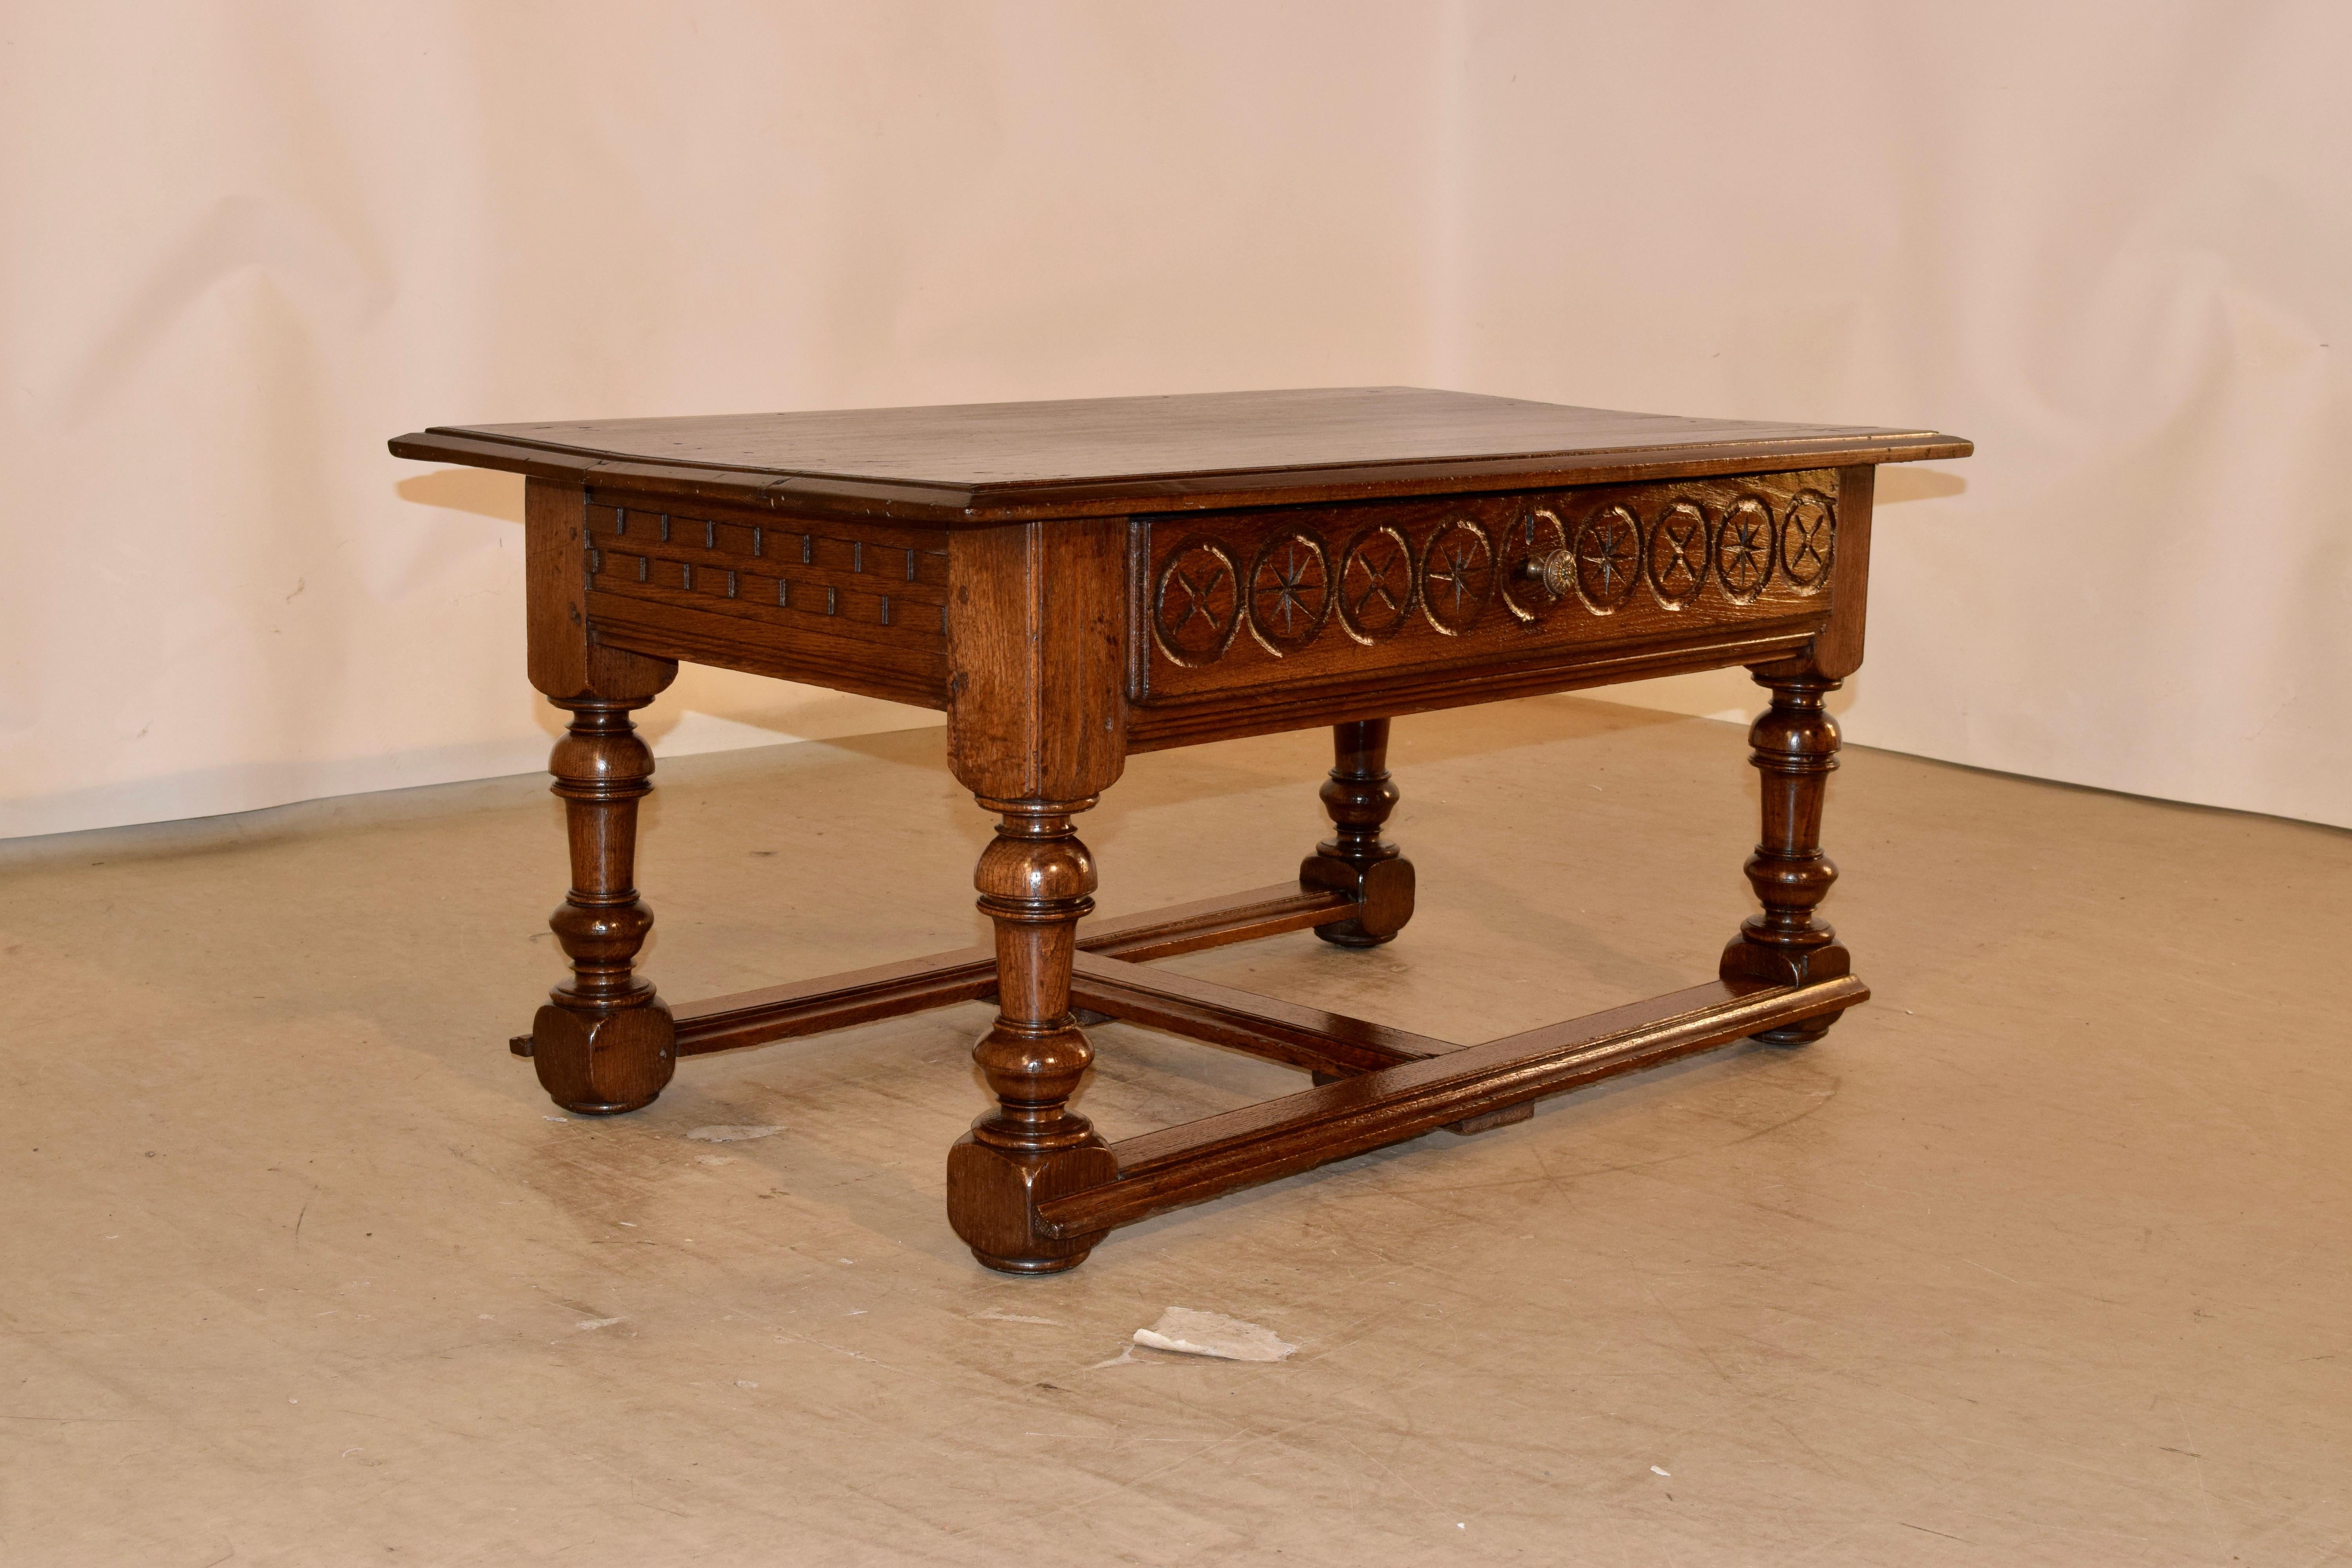 19th century oak coffee table from France with a three plank top which has a beveled edge, following down to a wonderfully hand carved decorated apron which contains a single drawer in the front. The table is supported on hand turned legs, joined by